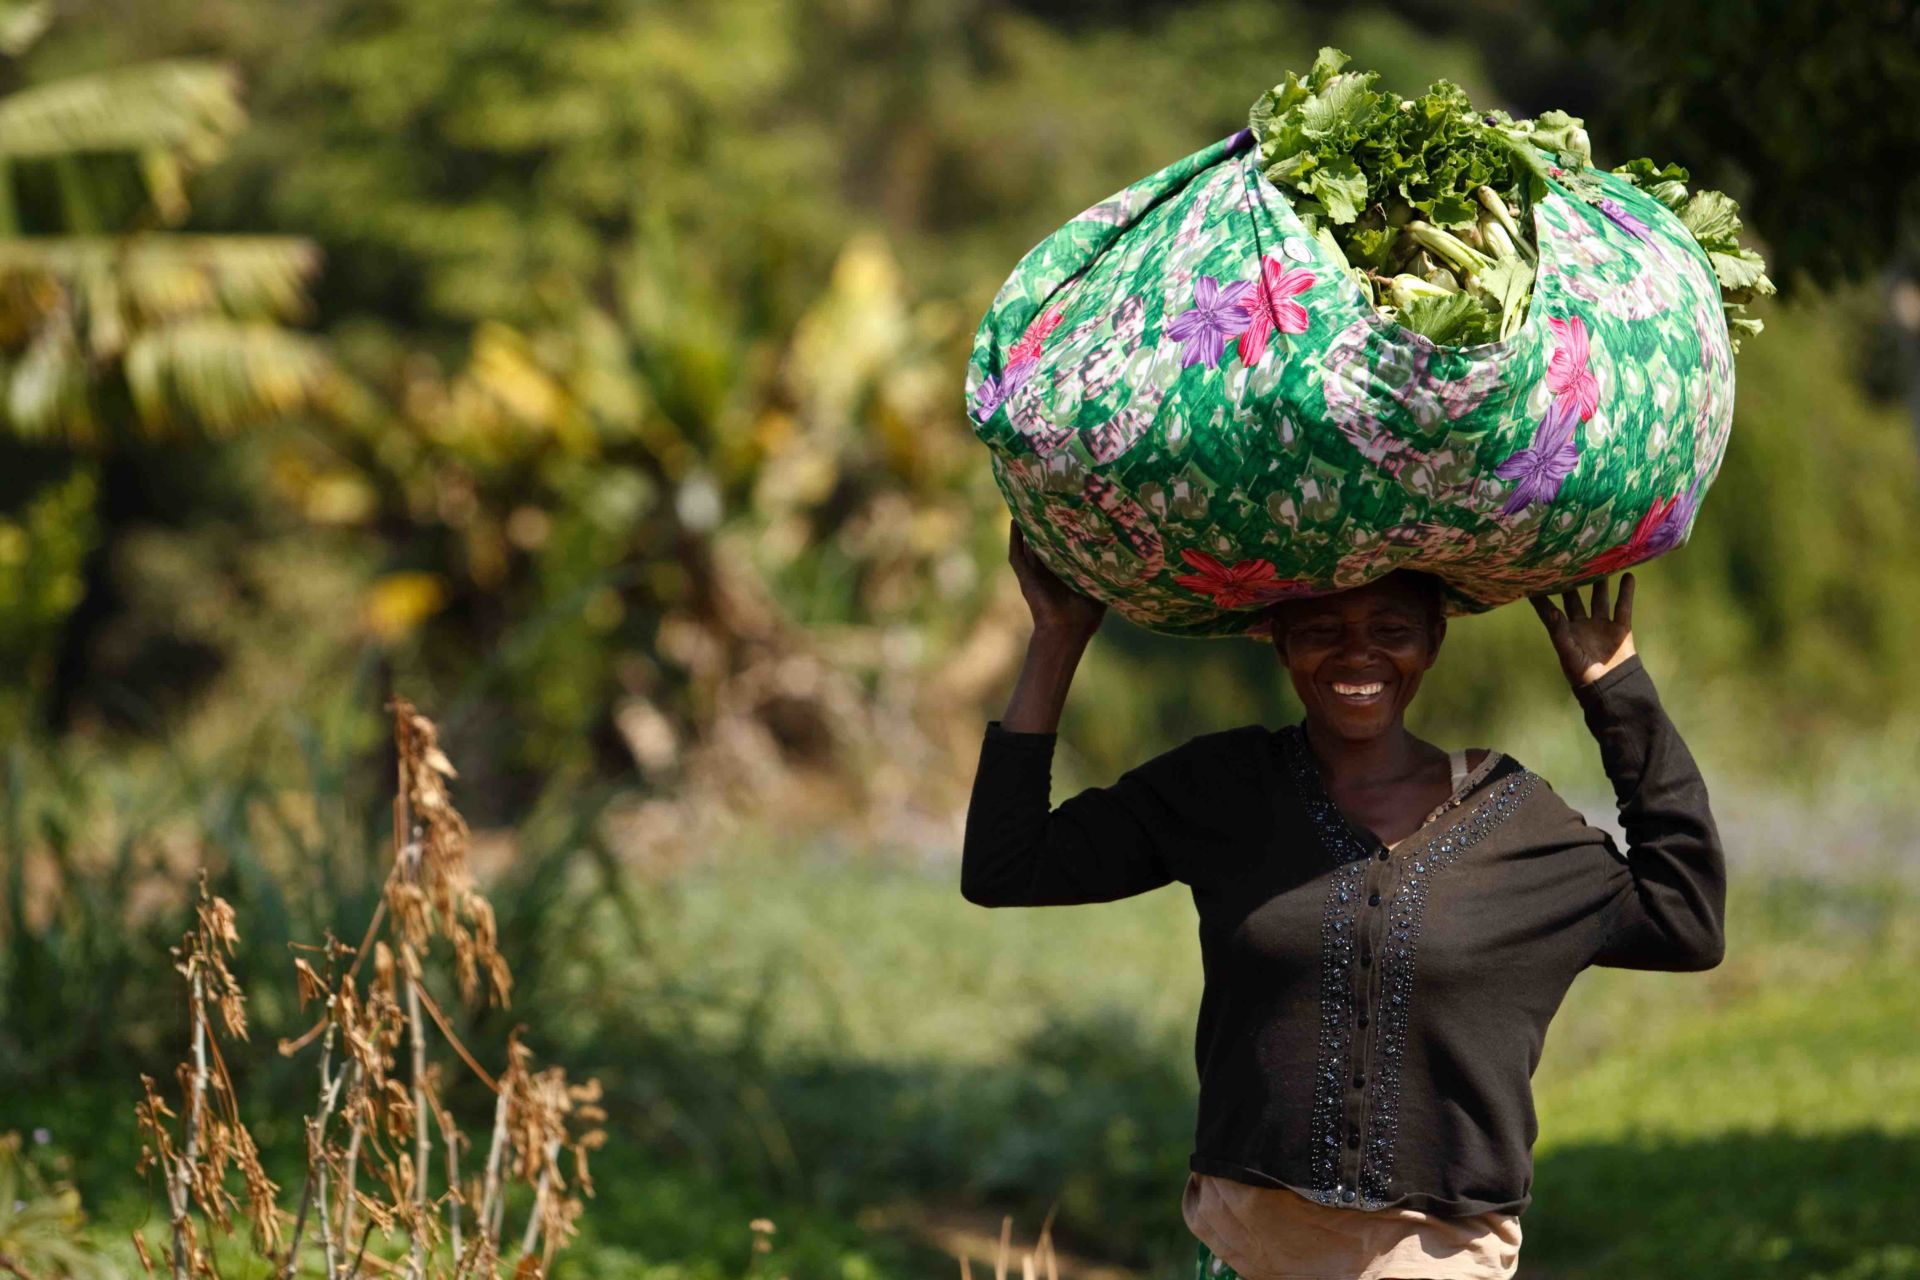 A woman carries a load of Chinese cabbage as she walks through a field in Kamilombe, near Lubumbashi, Katanga province, Democratic Republic of Congo on Wednesday June 29, 2011. As part of its urban and peri-urban horticulture project, the FAO has provided farmers with improved-variety seeds, and has rehabilitated irrigation and flood-prevention infrastructures.